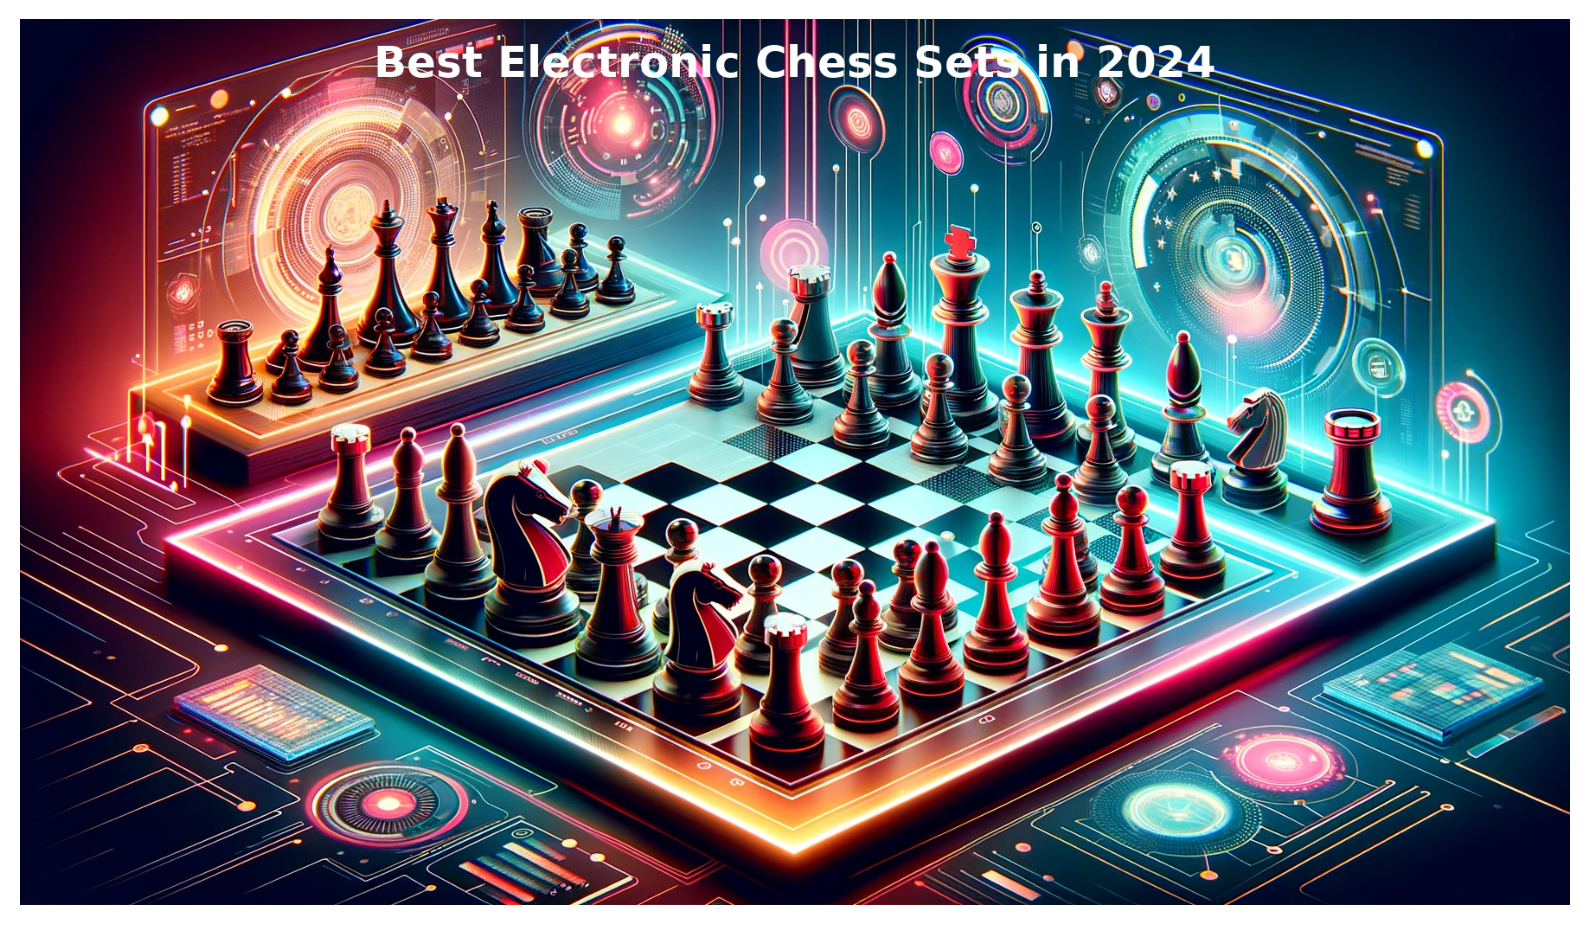 Grandmaster Electronic Magnetic Talking Chess Set Game - Play 2 Player or  Against Beginner to Expert Computer- 12 Chess Modes, 30 Skill Levels Plus 8  Different Games for Adults and Kids 